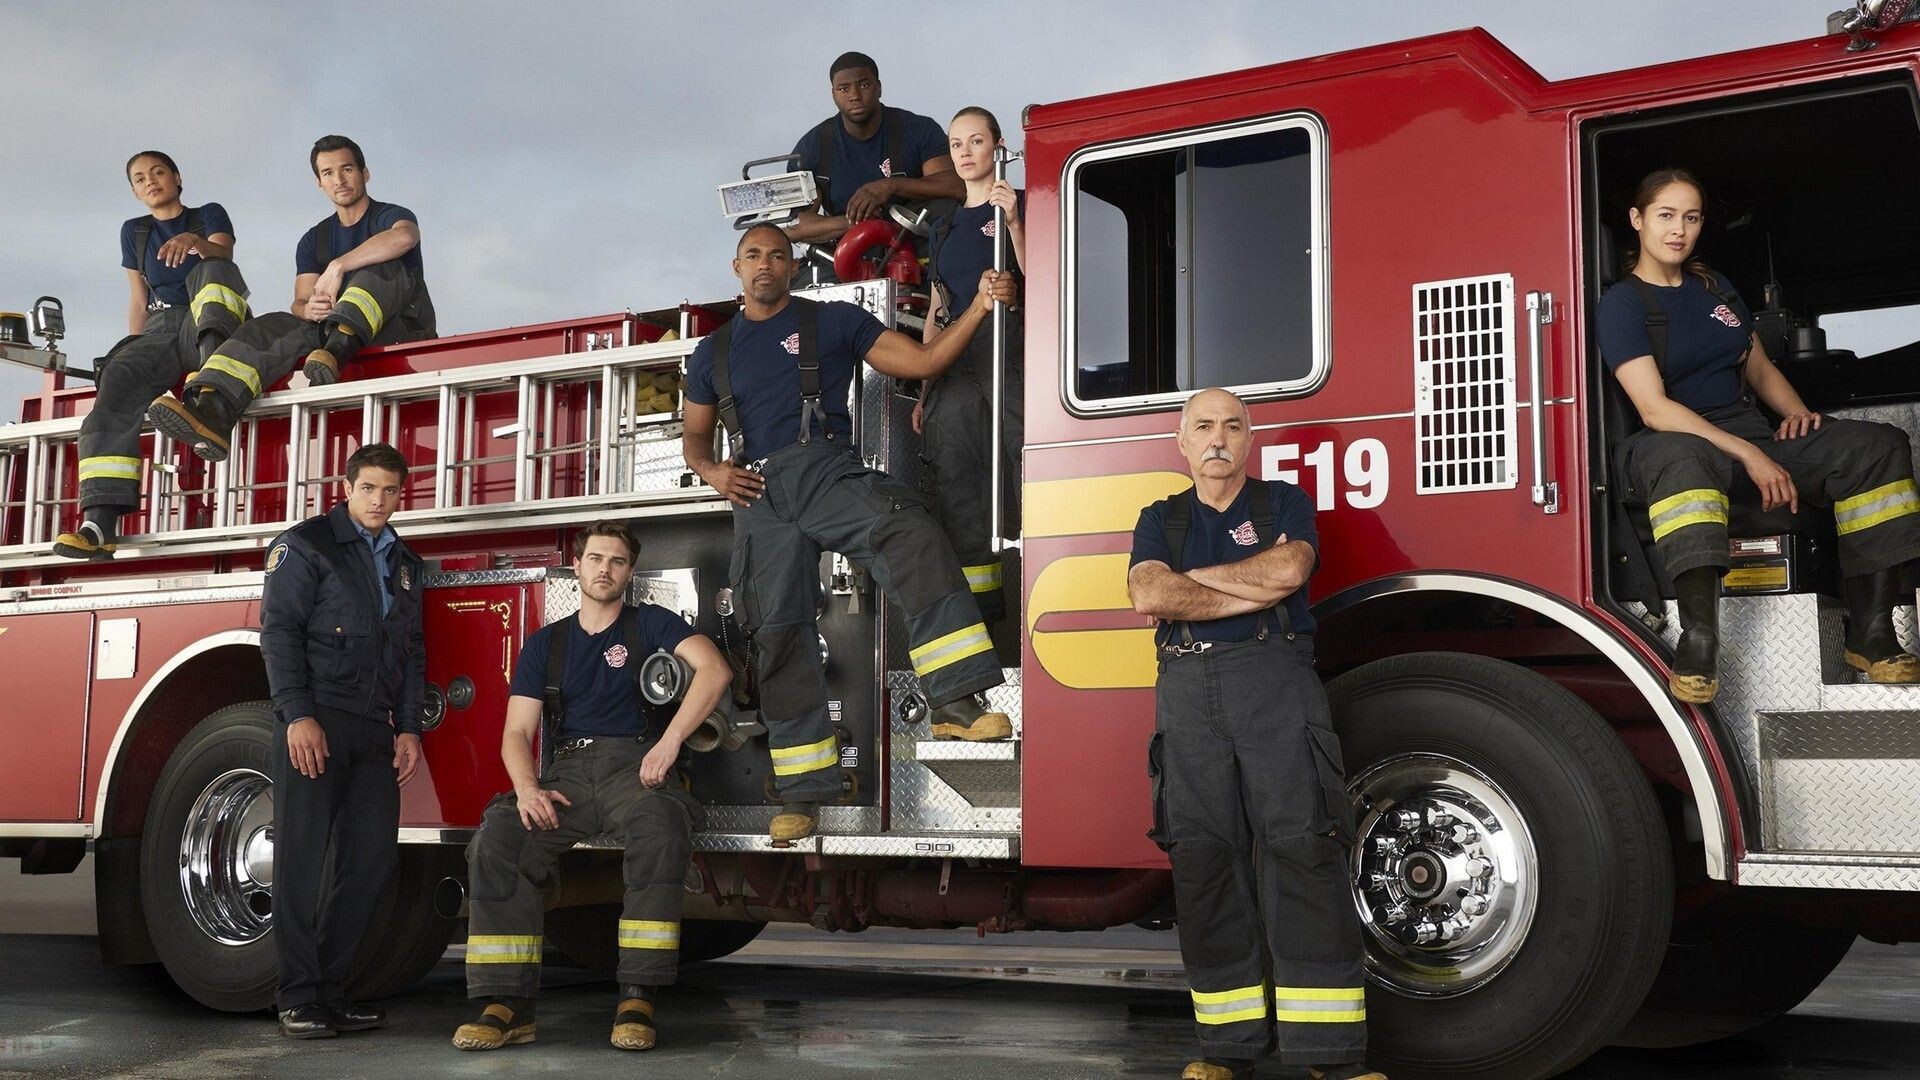 Station 19 wallpapers, Emotional connections, Heartwarming scenes, Multi-dimensional cast, 1920x1080 Full HD Desktop